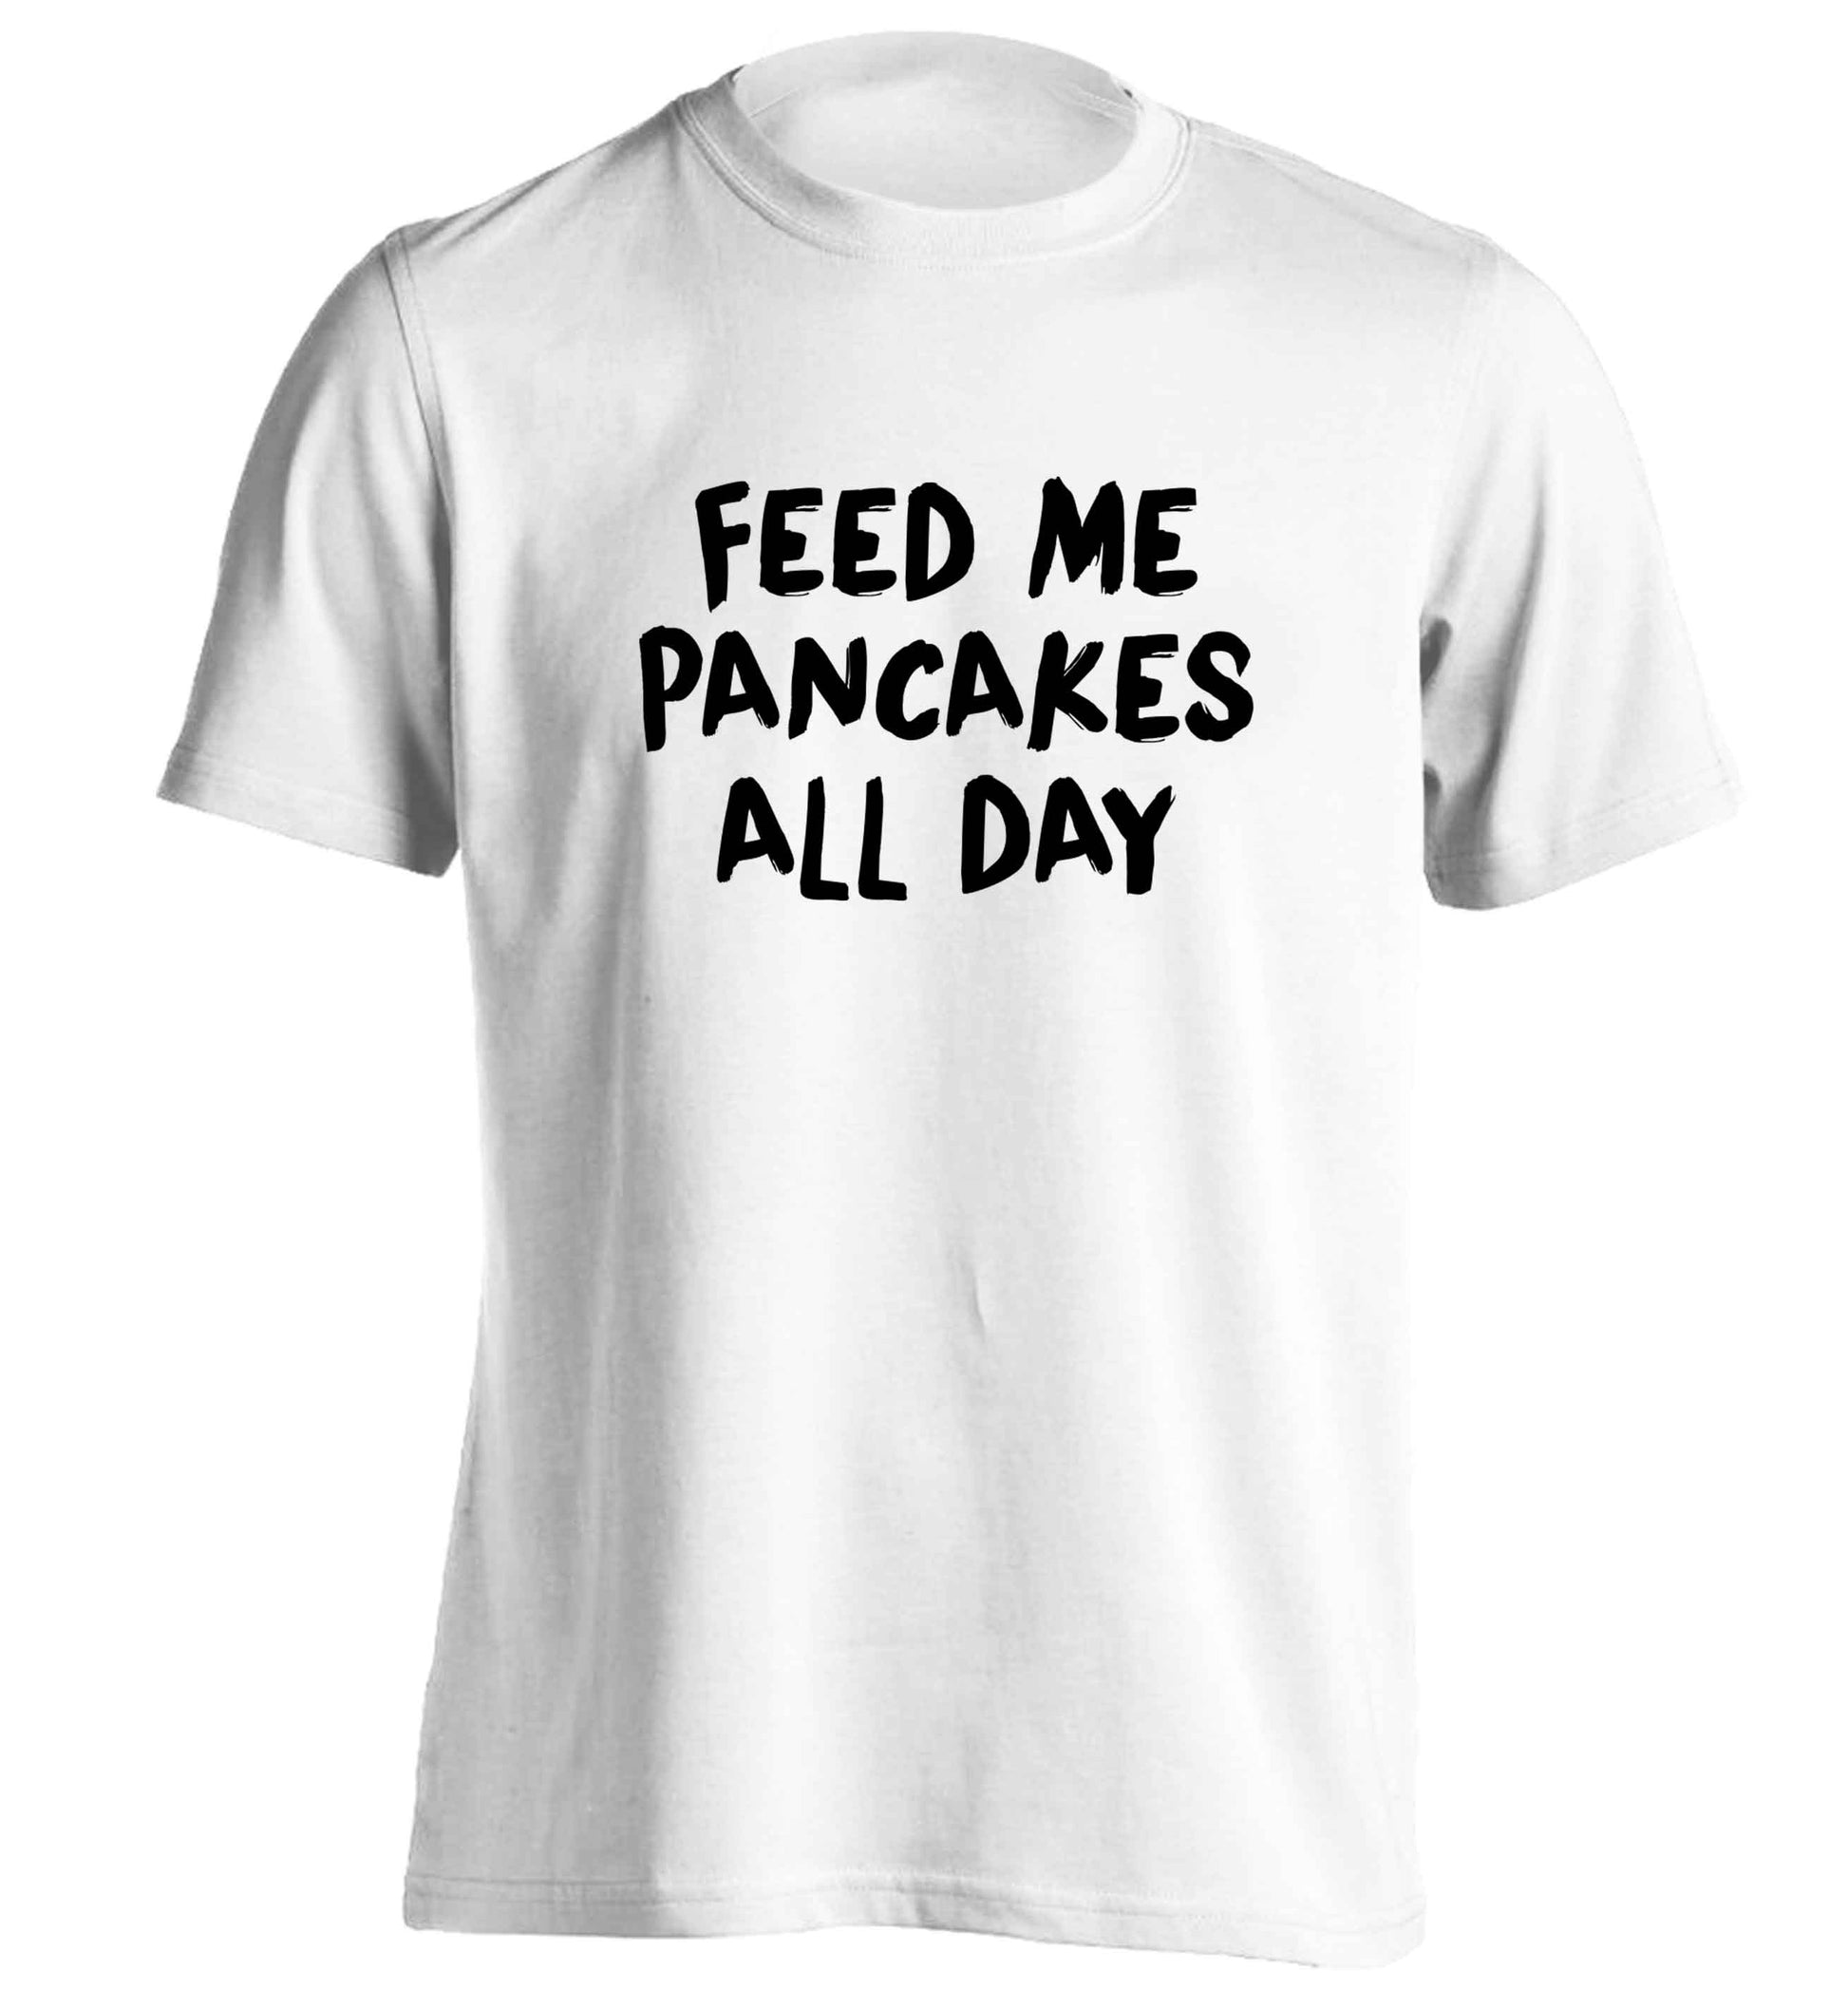 Feed me pancakes all day adults unisex white Tshirt 2XL